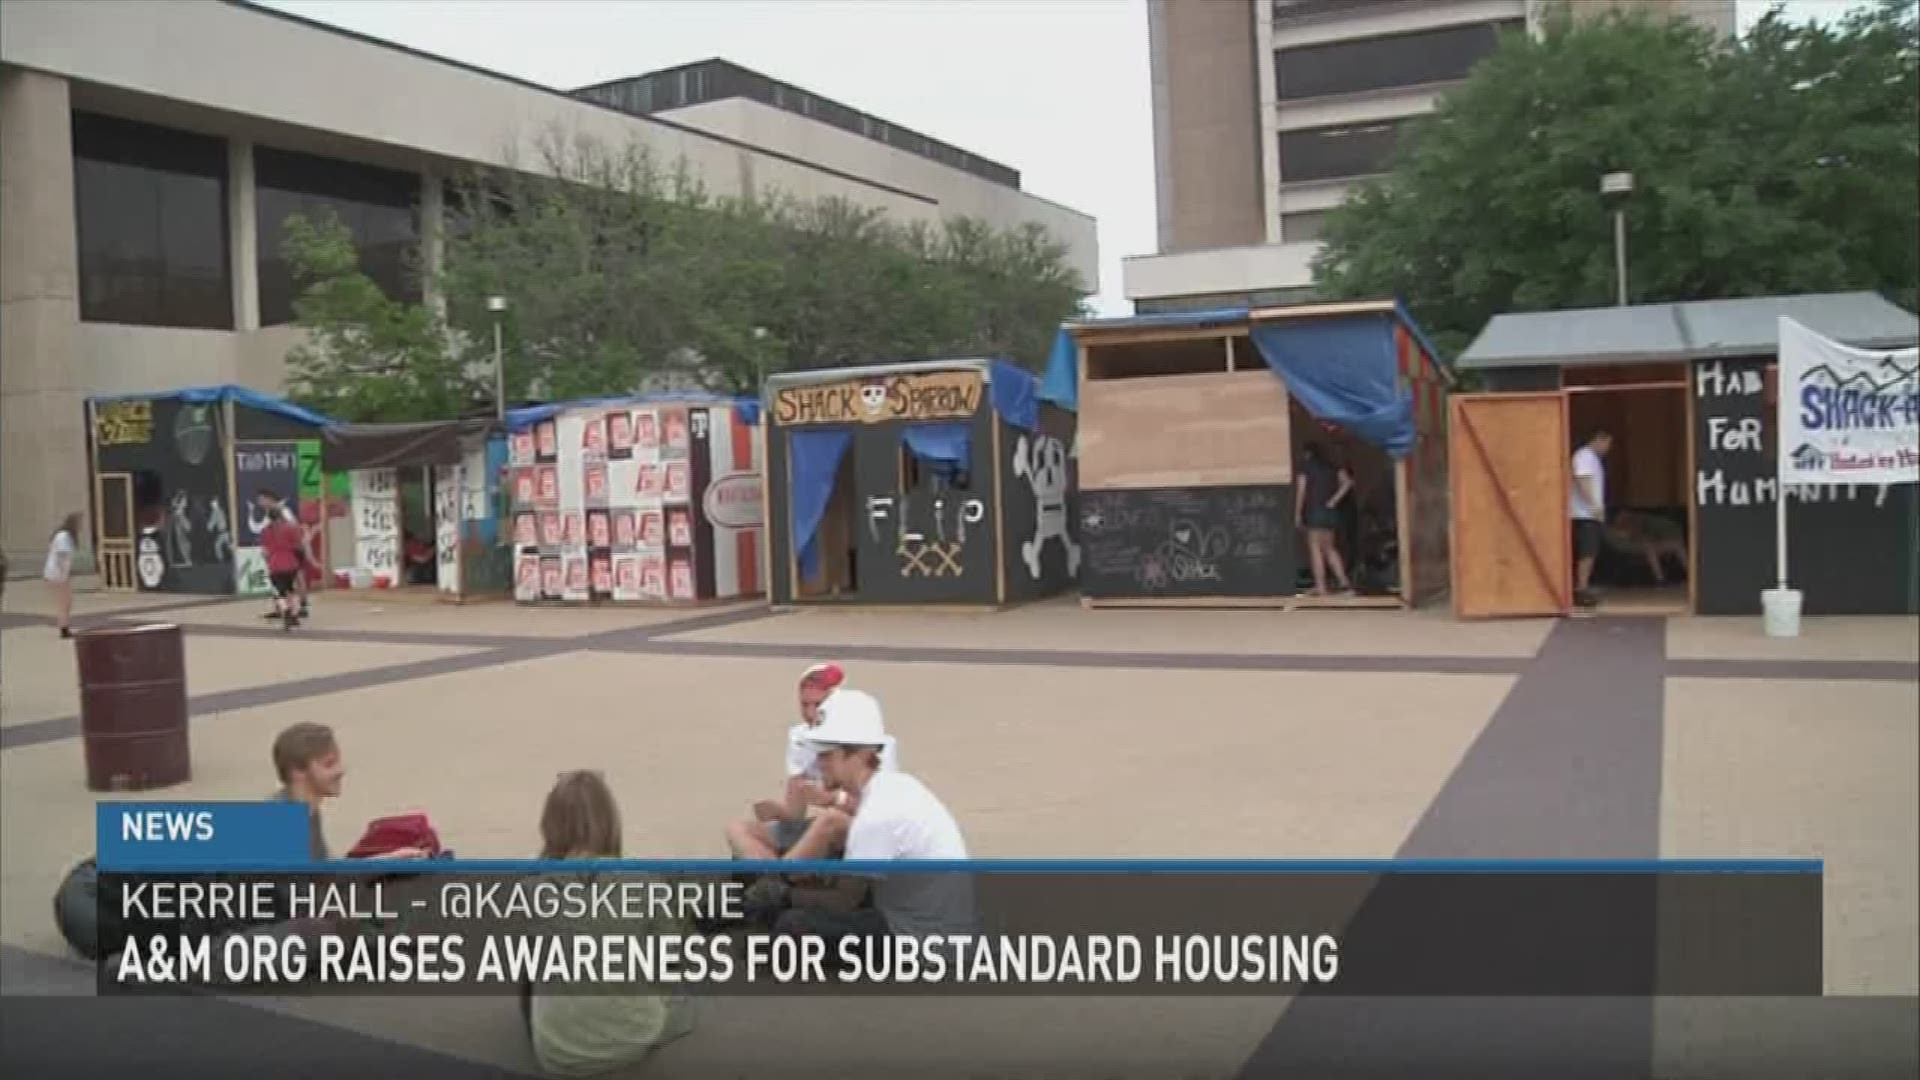 Shack-A-Thon is an annual event on the Texas A&M campus to raise awareness about homelessness.